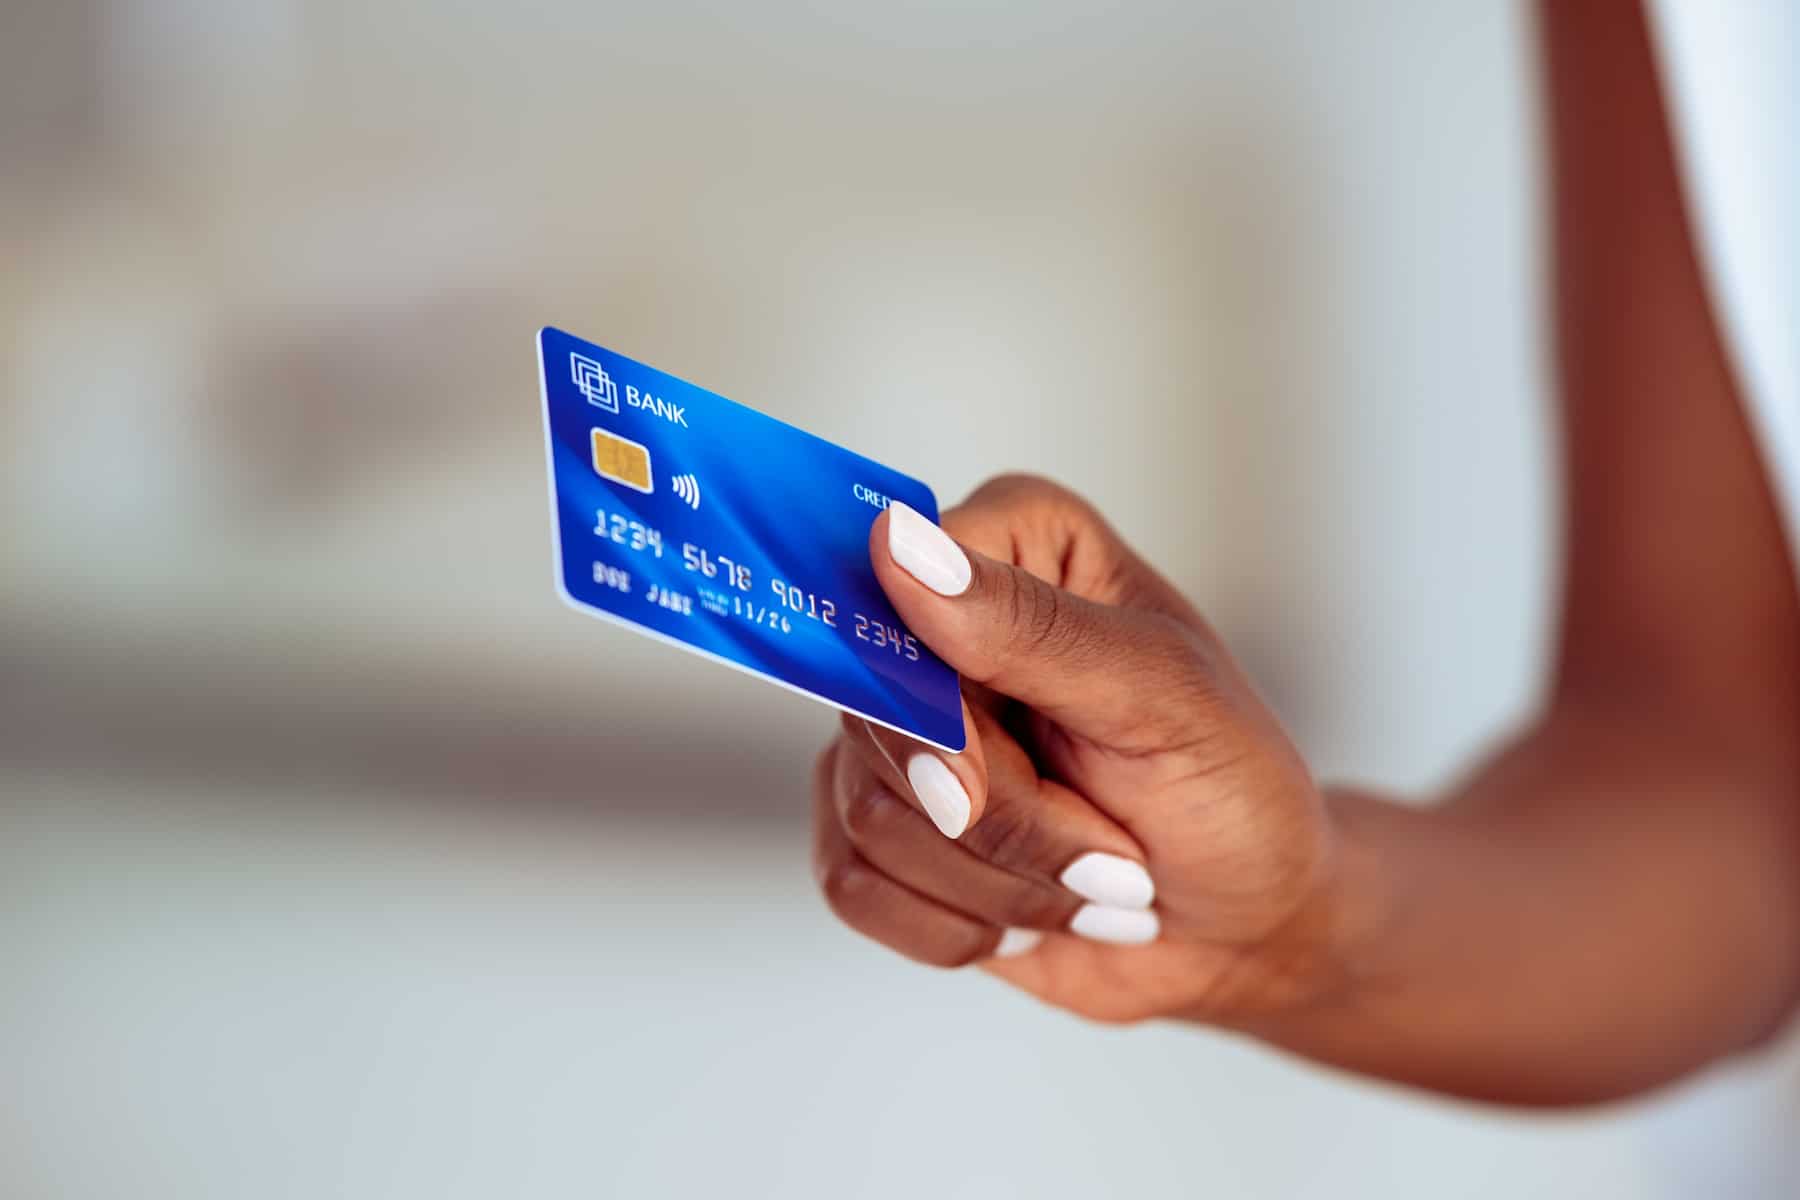 Credit card in woman's hand to illustrate Visa